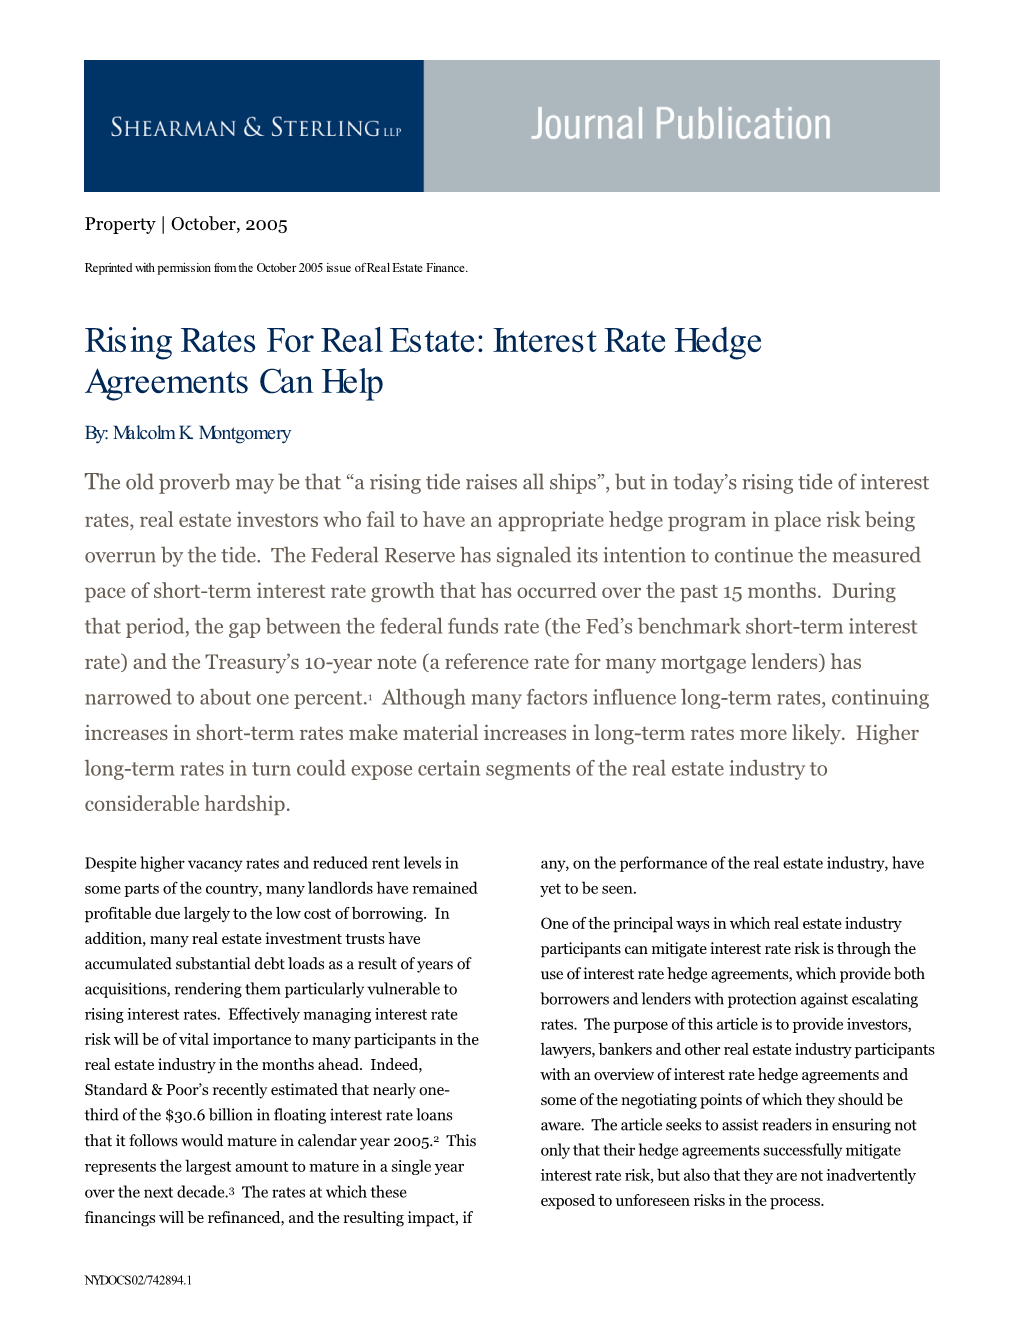 Rising Rates for Real Estate: Interest Rate Hedge Agreements Can Help